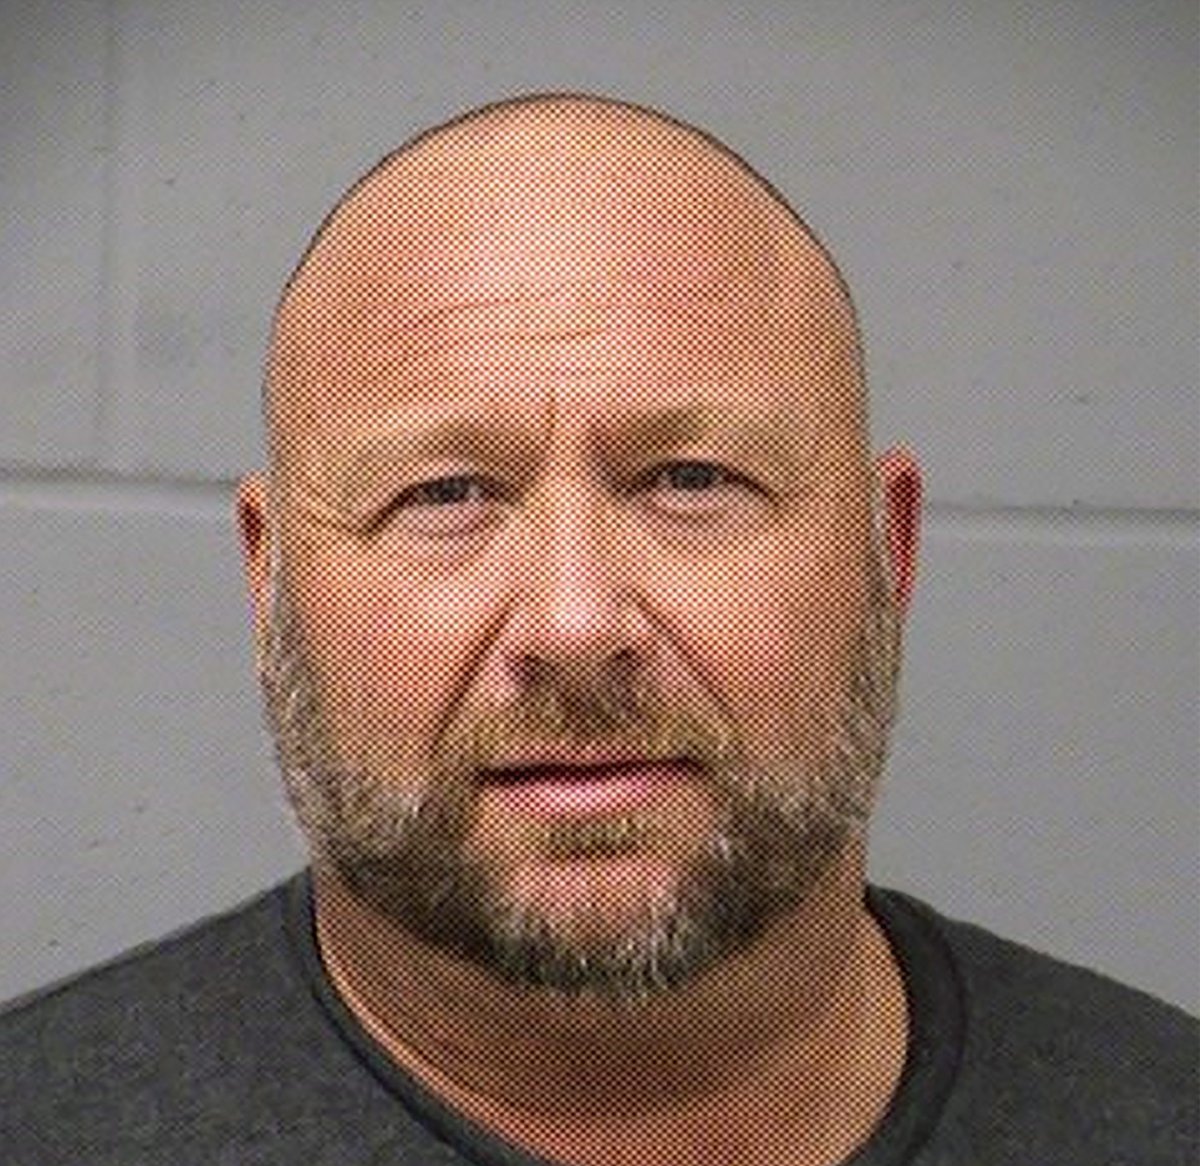 The far-right conspiracy theorist was arrested and charged with driving while intoxicated earlier this week.